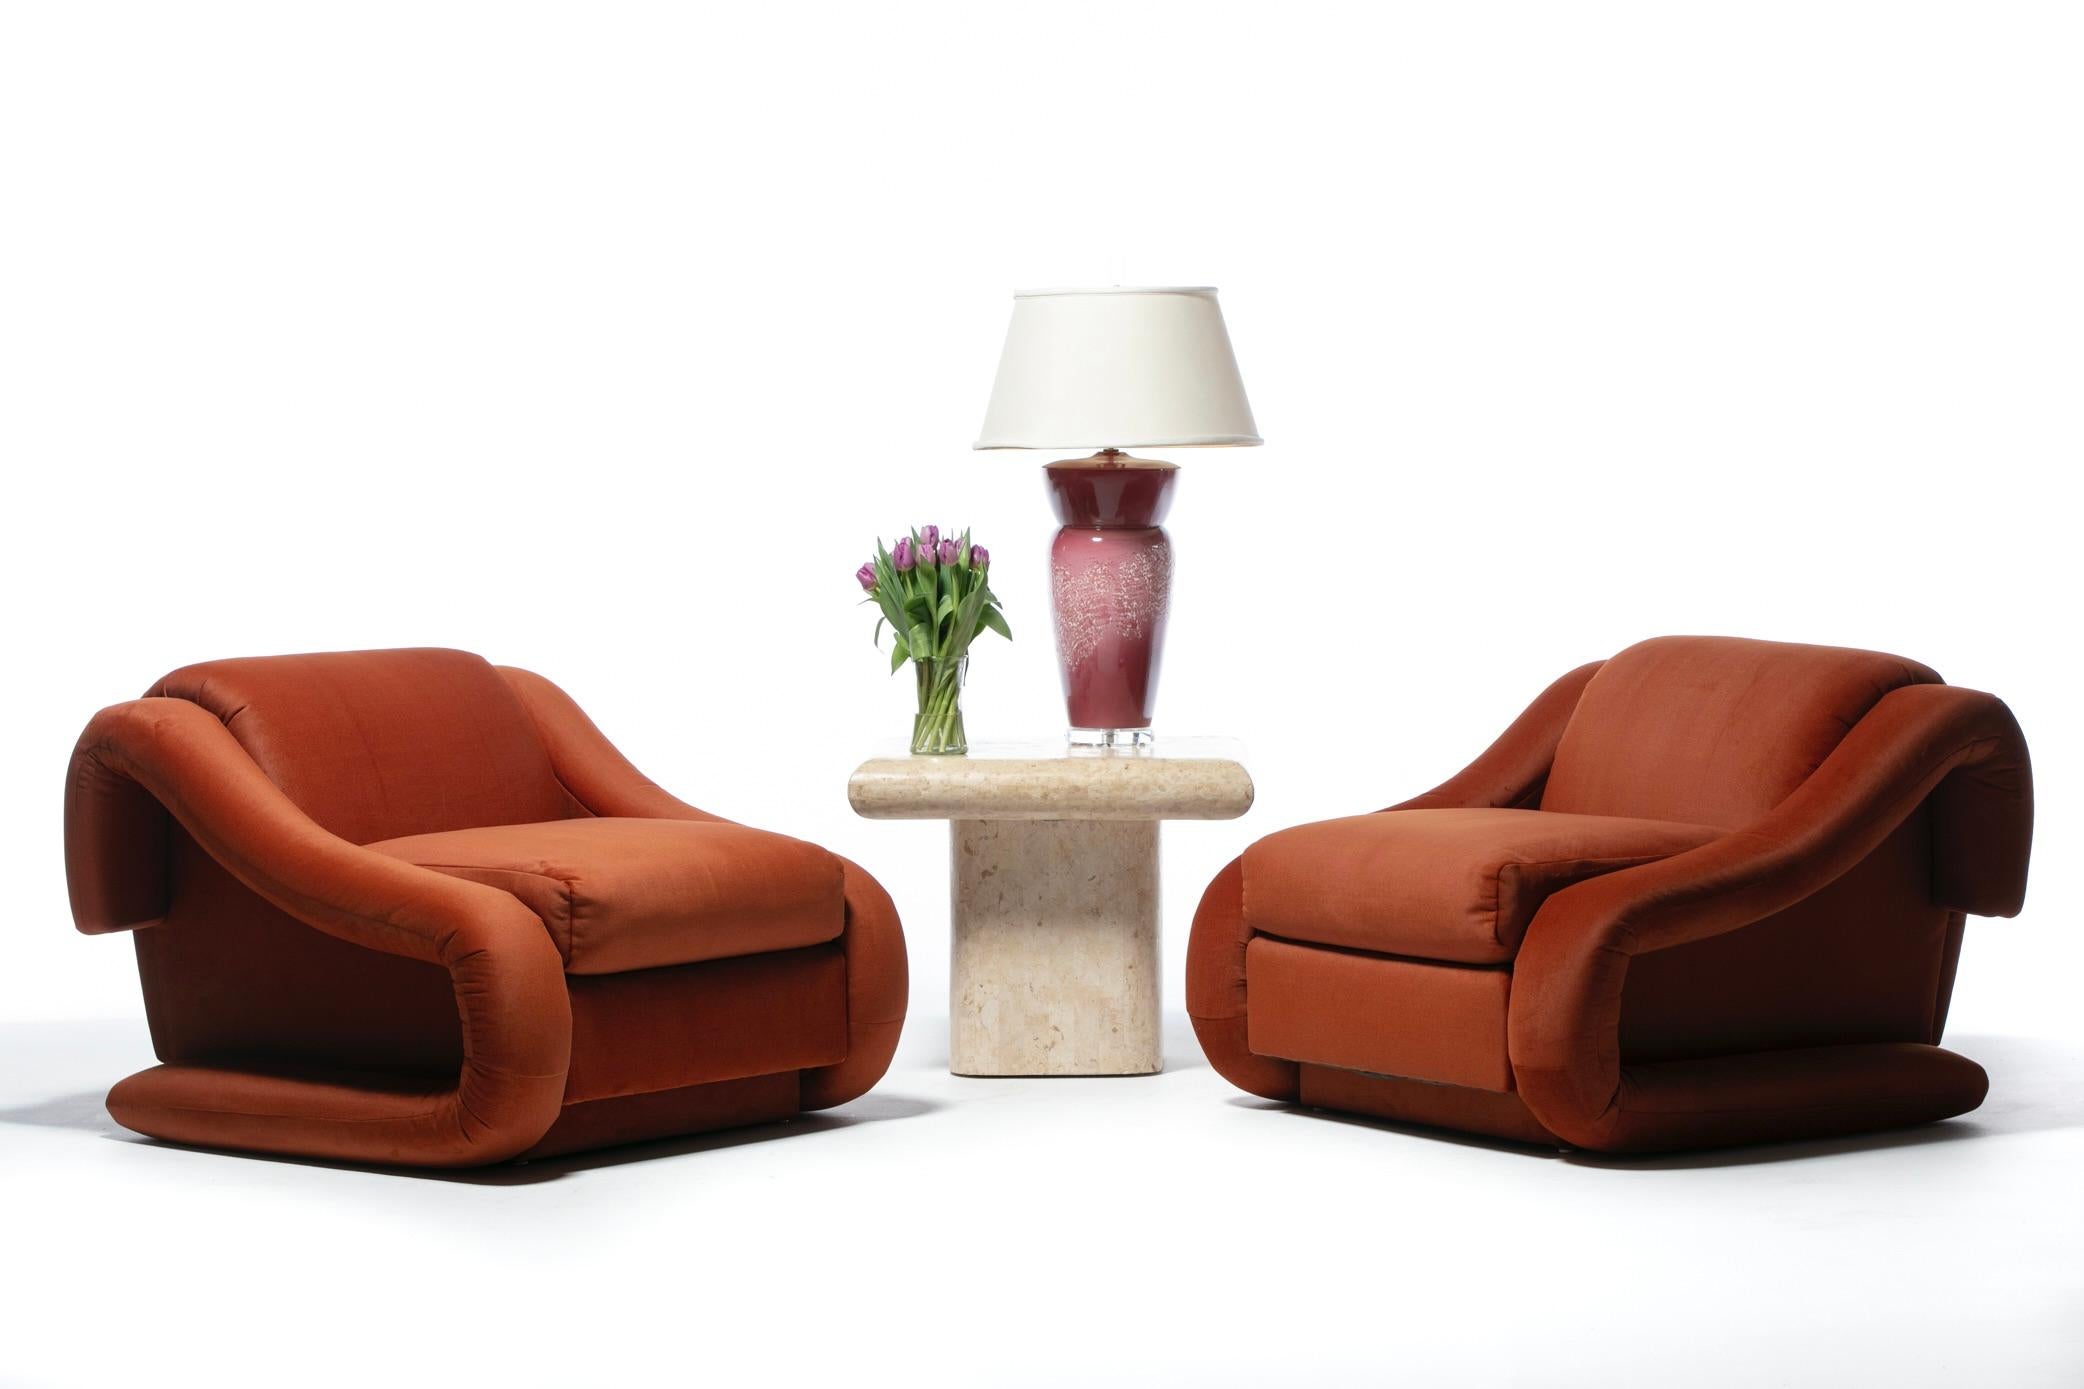 Incredibly sculptural monumental size Post Modern Pair of Lounge Chairs by Weiman in new super soft Marmalade Orange upholstery. Two pair available. The intersection of Modern and Luxury. Attention grabbing lounge chairs that ooze confidence and